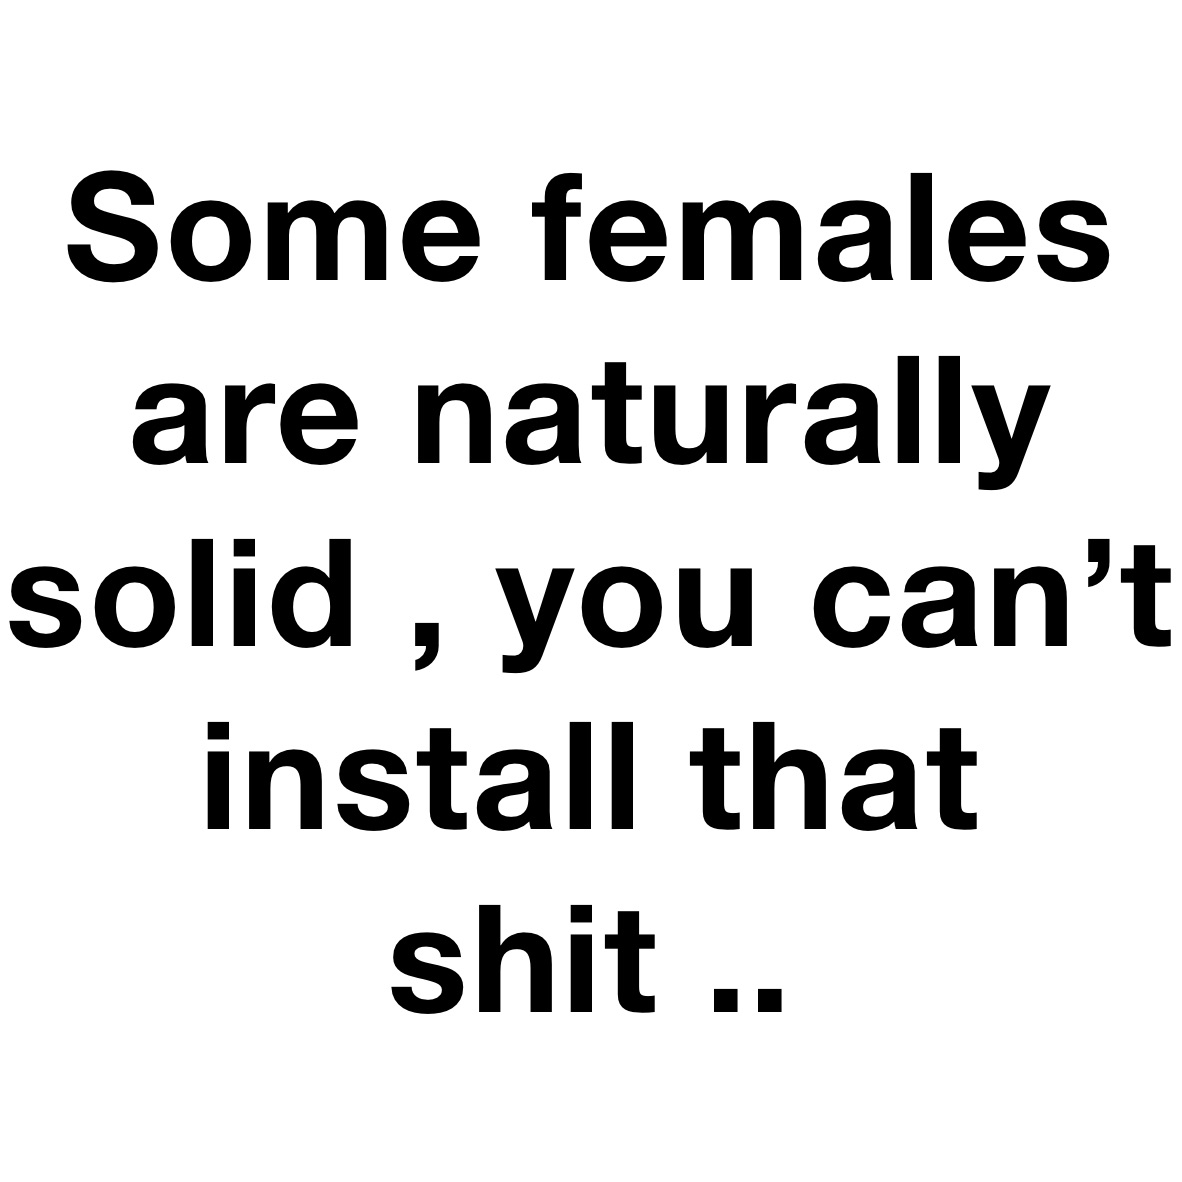 Some females are naturally solid , you can’t install that shit .. 